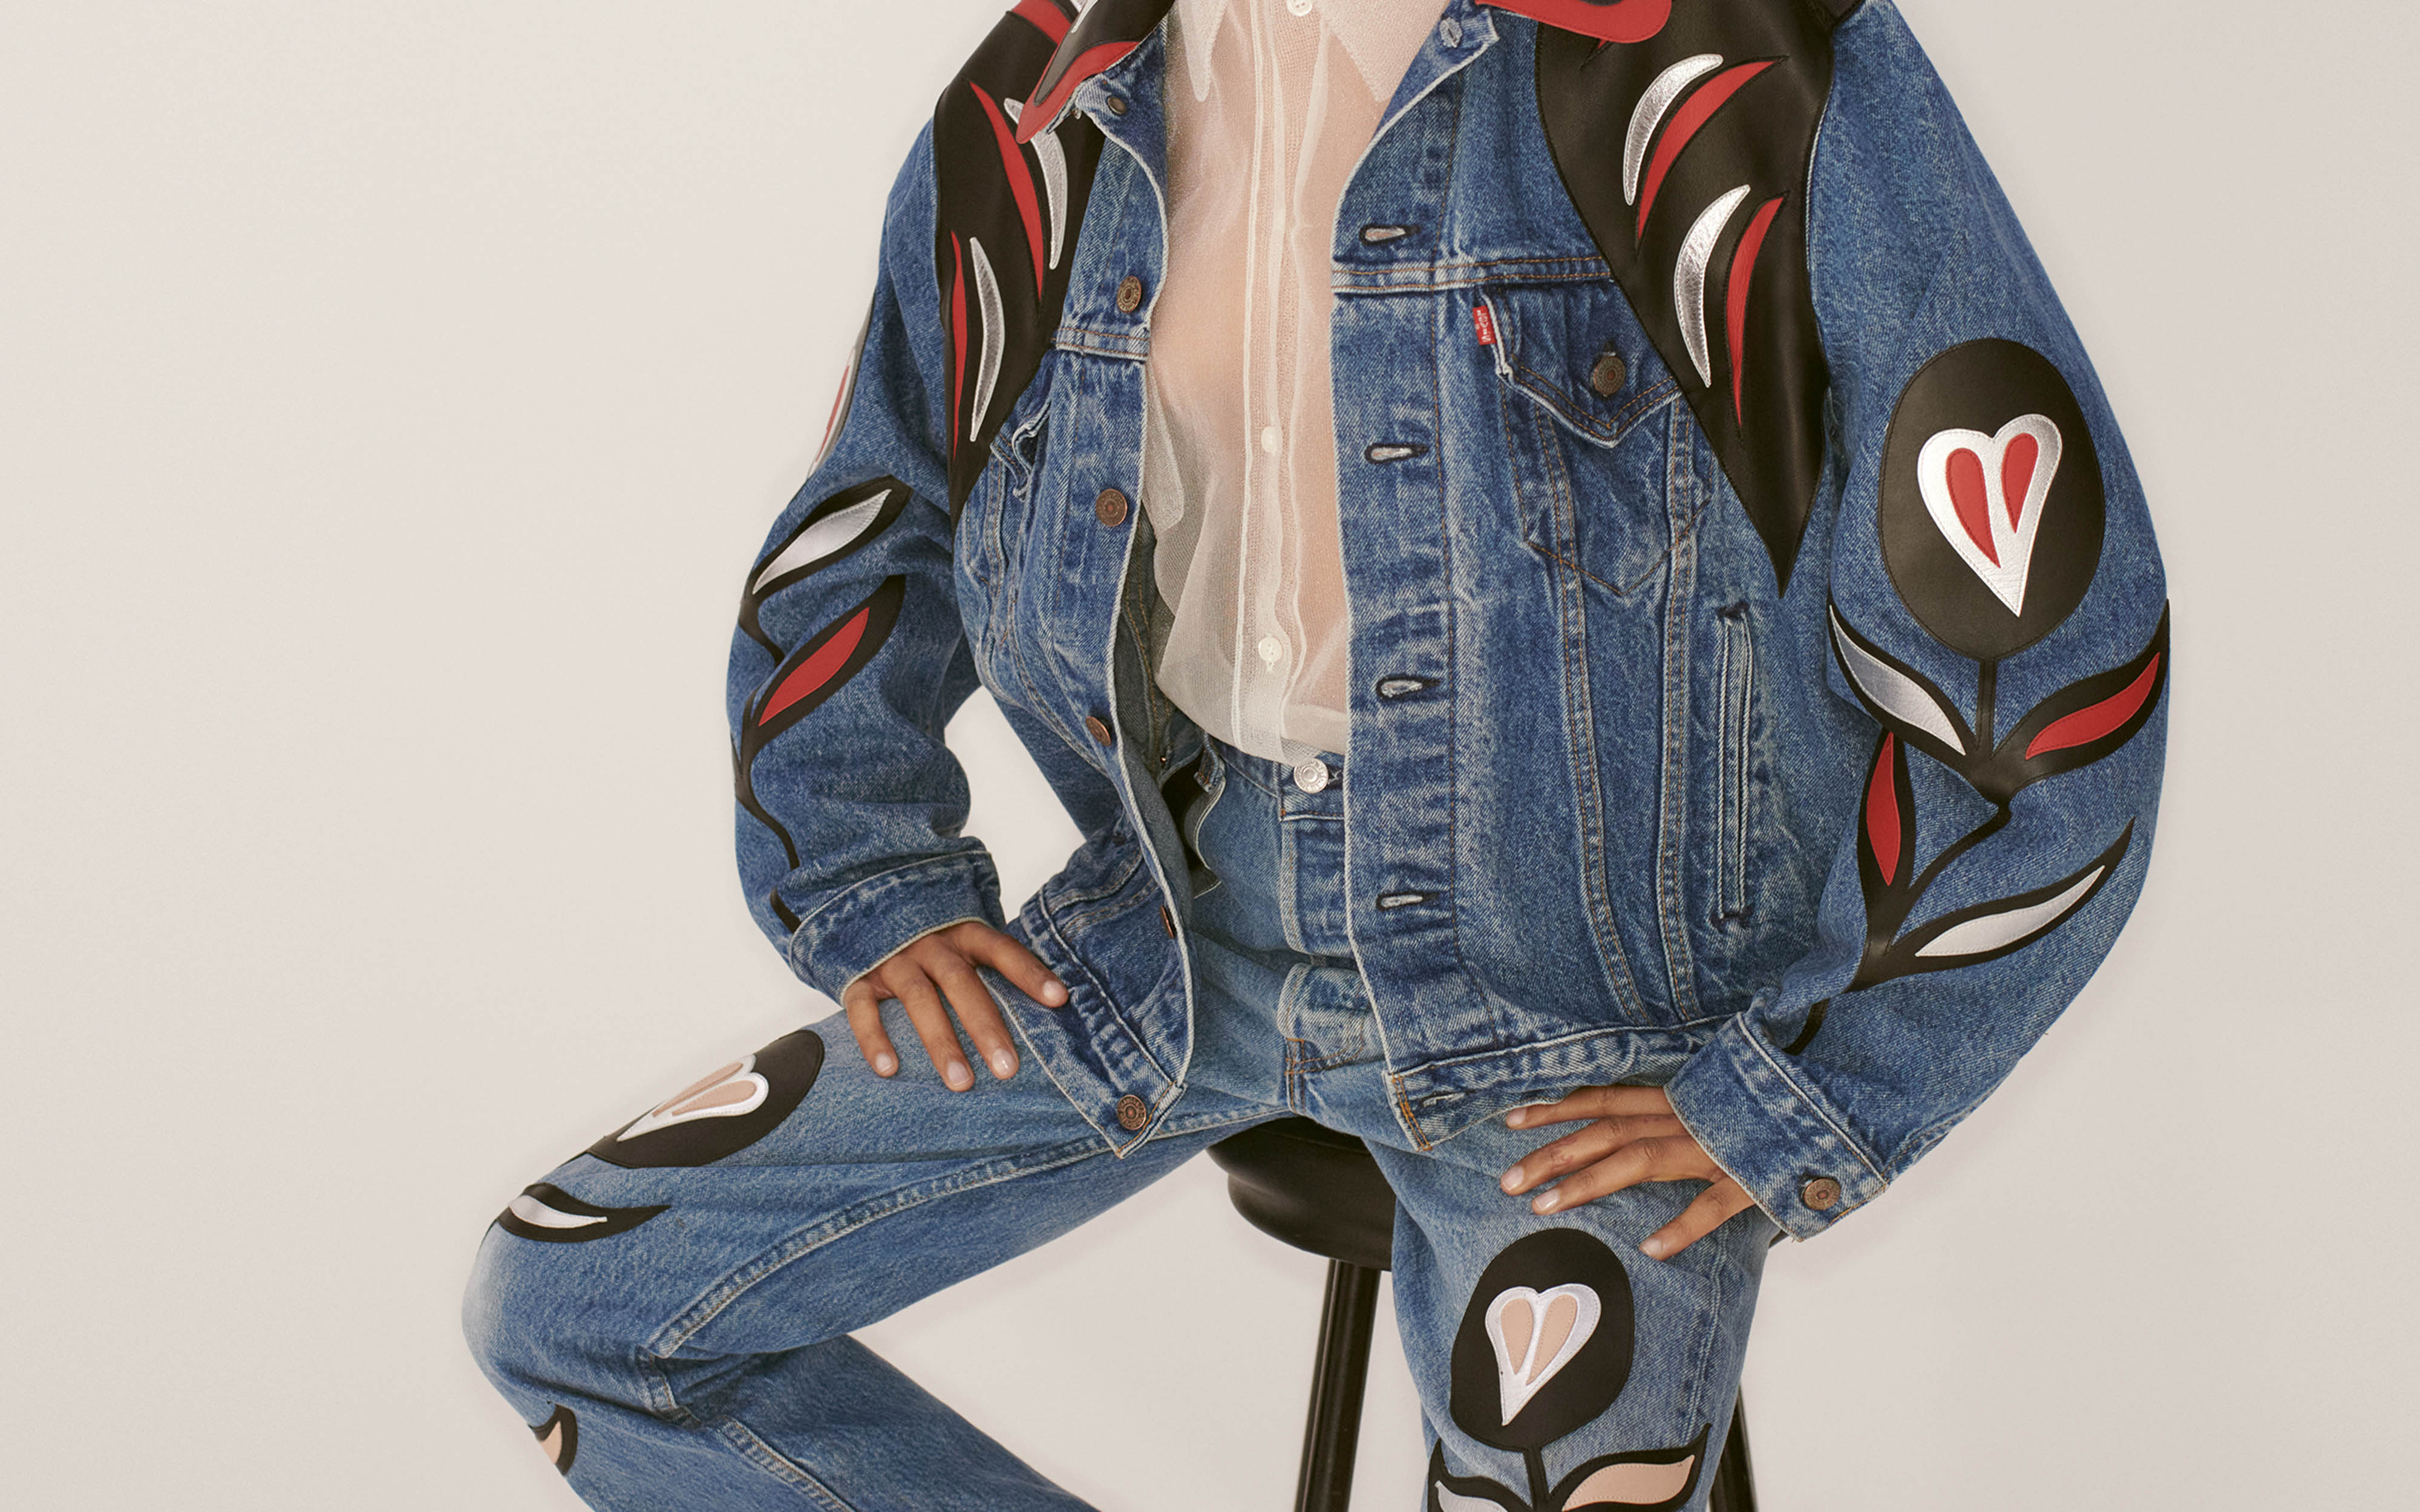 Miu Miu Gives New Life to Pre-Loved Levi’s Denim + Other Fashion News to Know